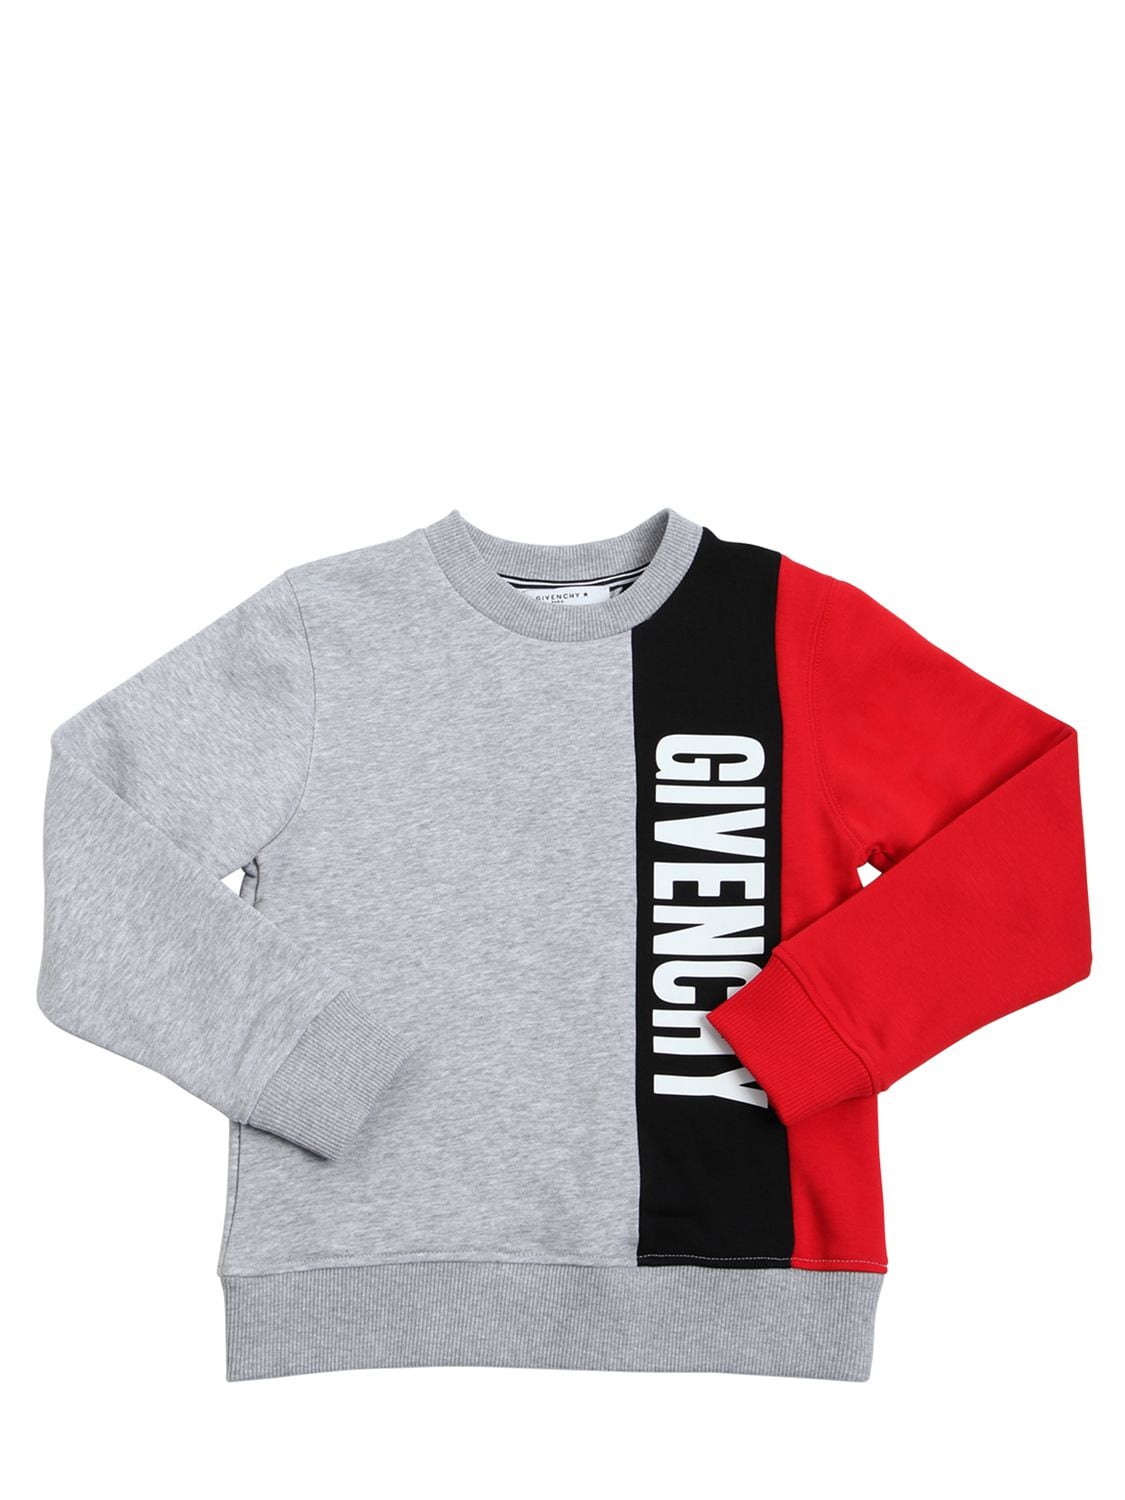 Givenchy Kids' Tricolor Cotton Sweatshirt In Grey,red